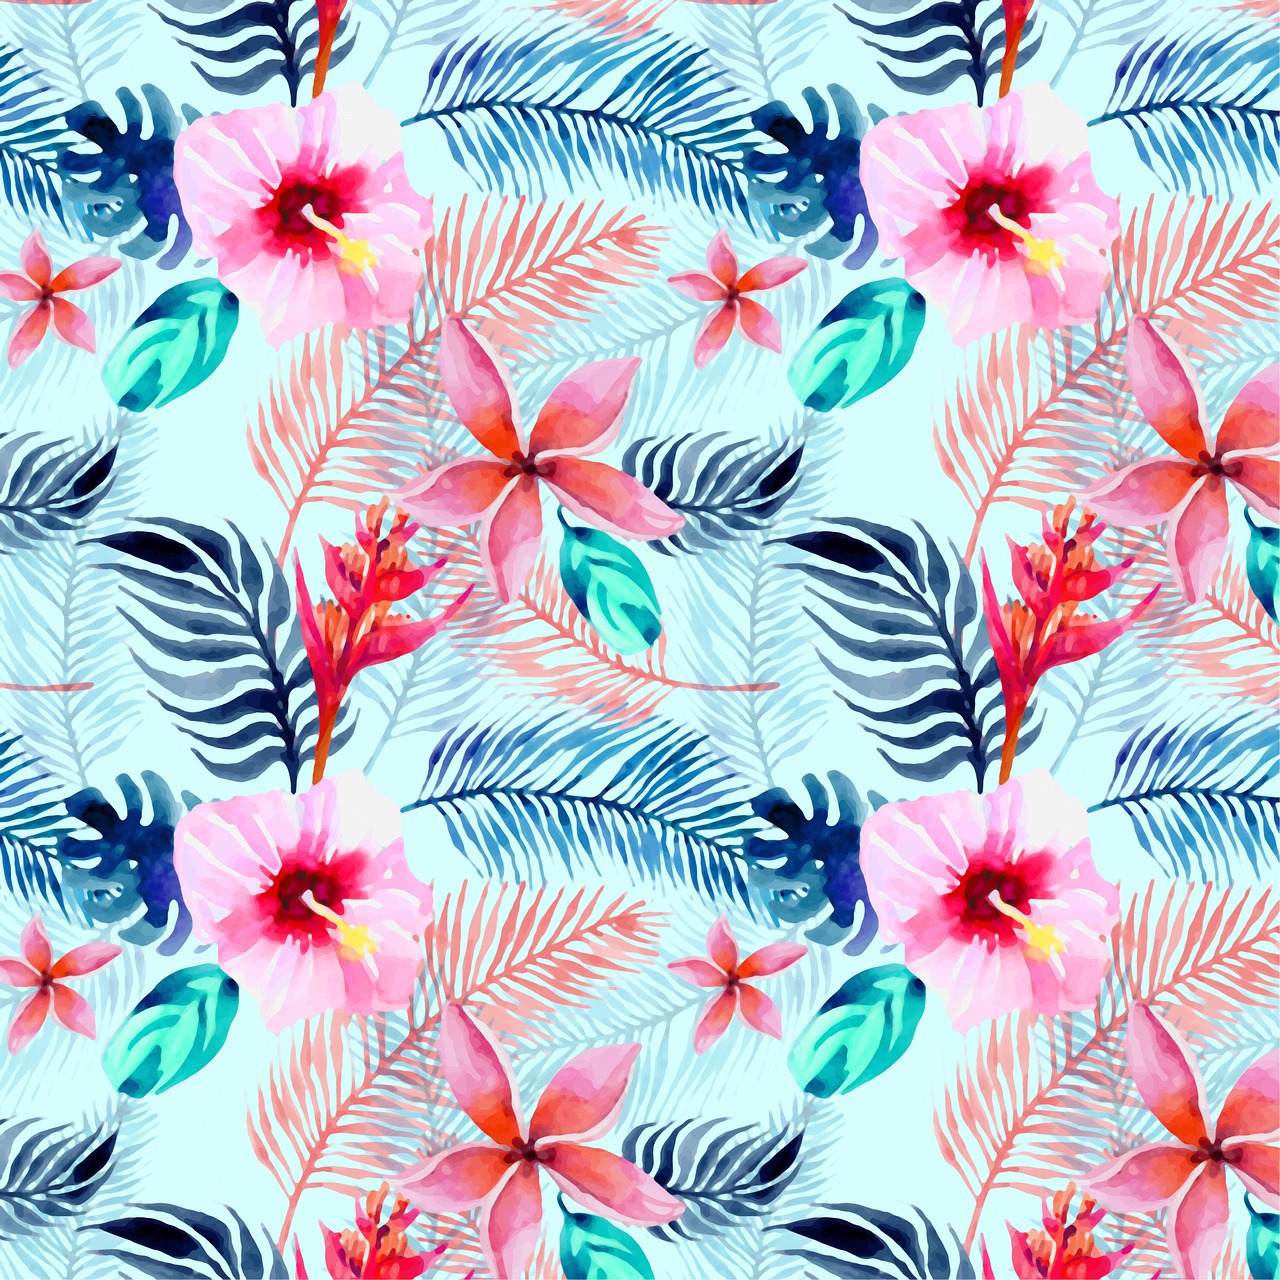 a pattern of flowers and leaves on a blue background, shutterstock, palmtrees, aquarelle, print!, hibiscus